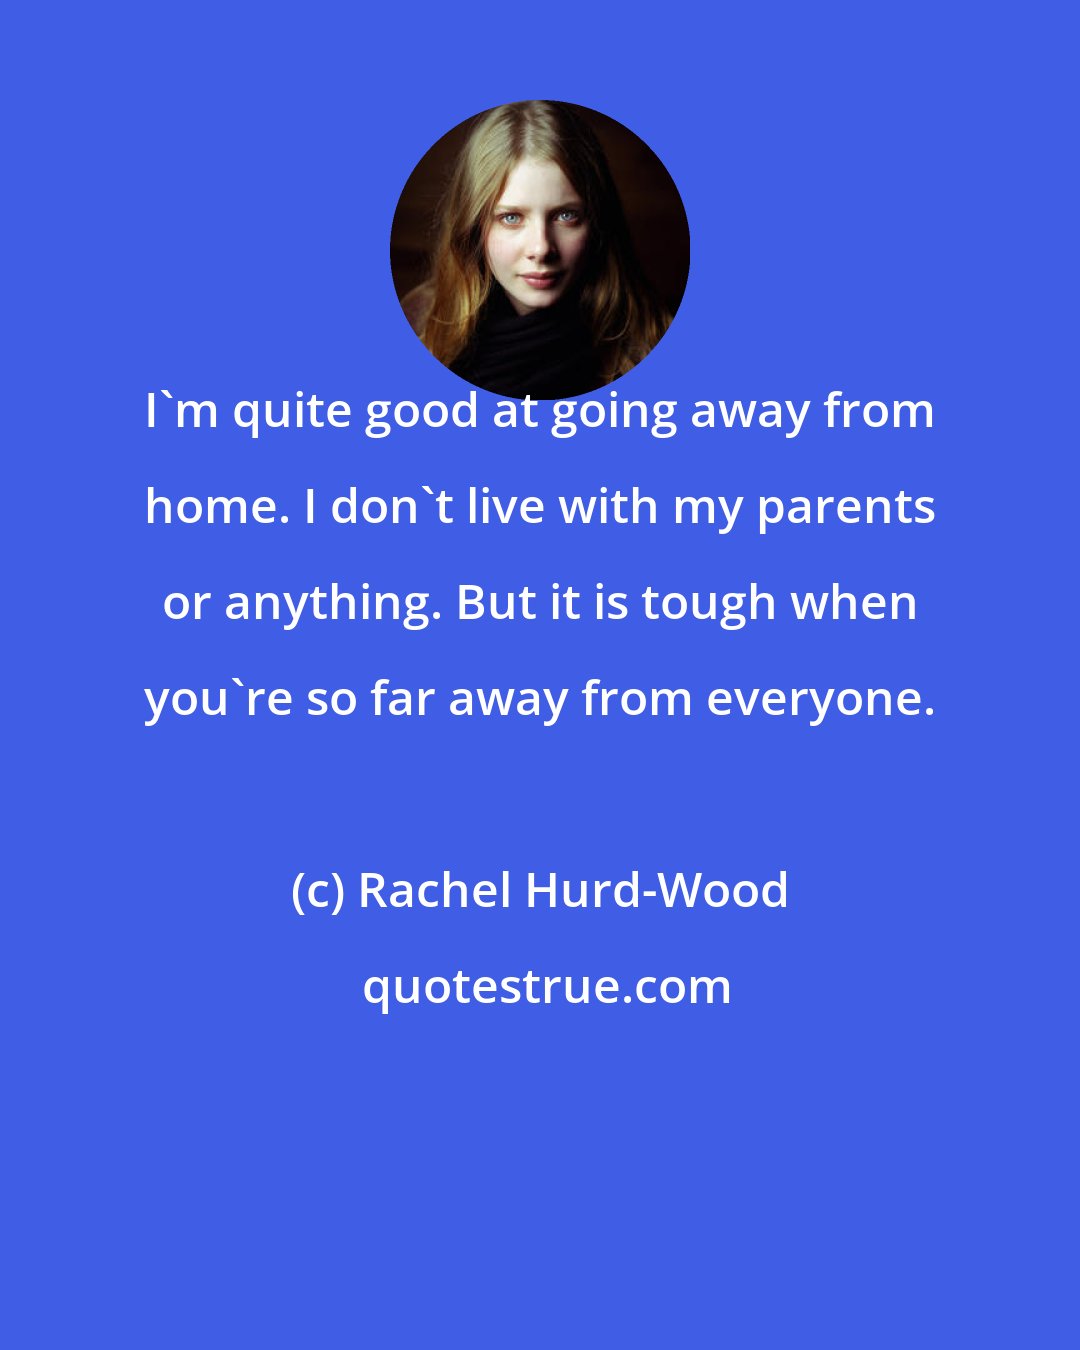 Rachel Hurd-Wood: I'm quite good at going away from home. I don't live with my parents or anything. But it is tough when you're so far away from everyone.